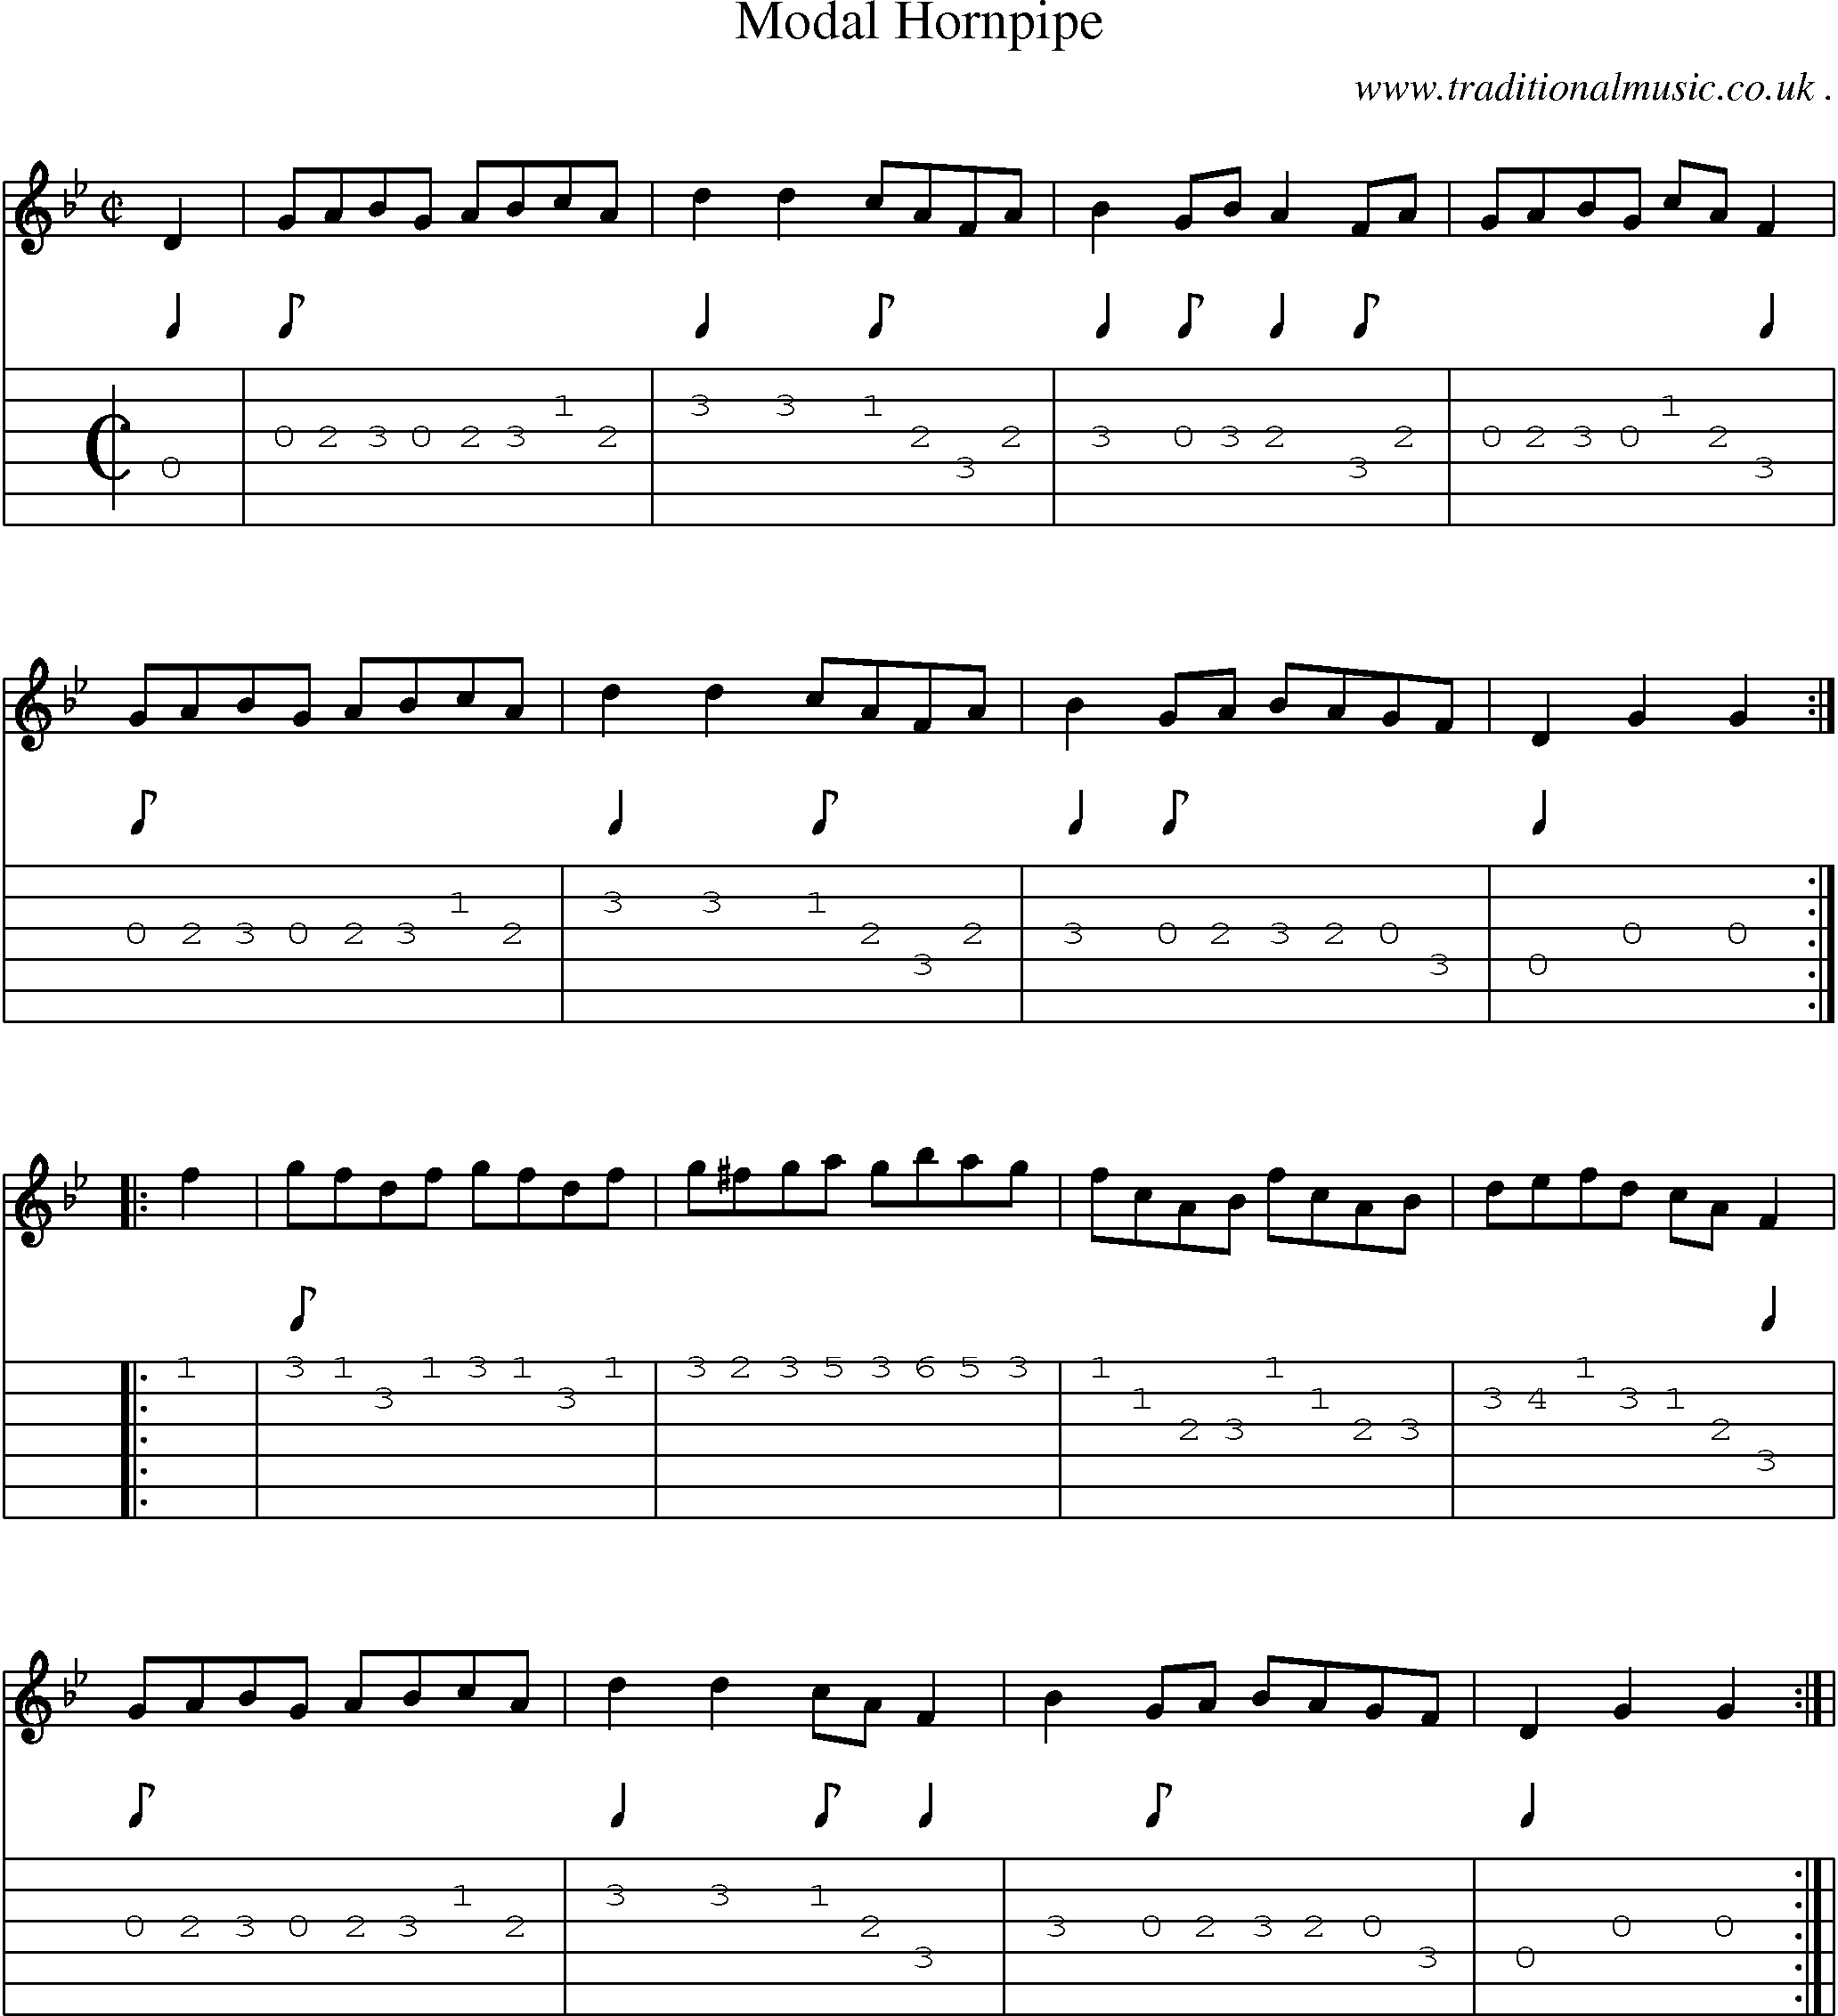 Sheet-Music and Guitar Tabs for Modal Hornpipe